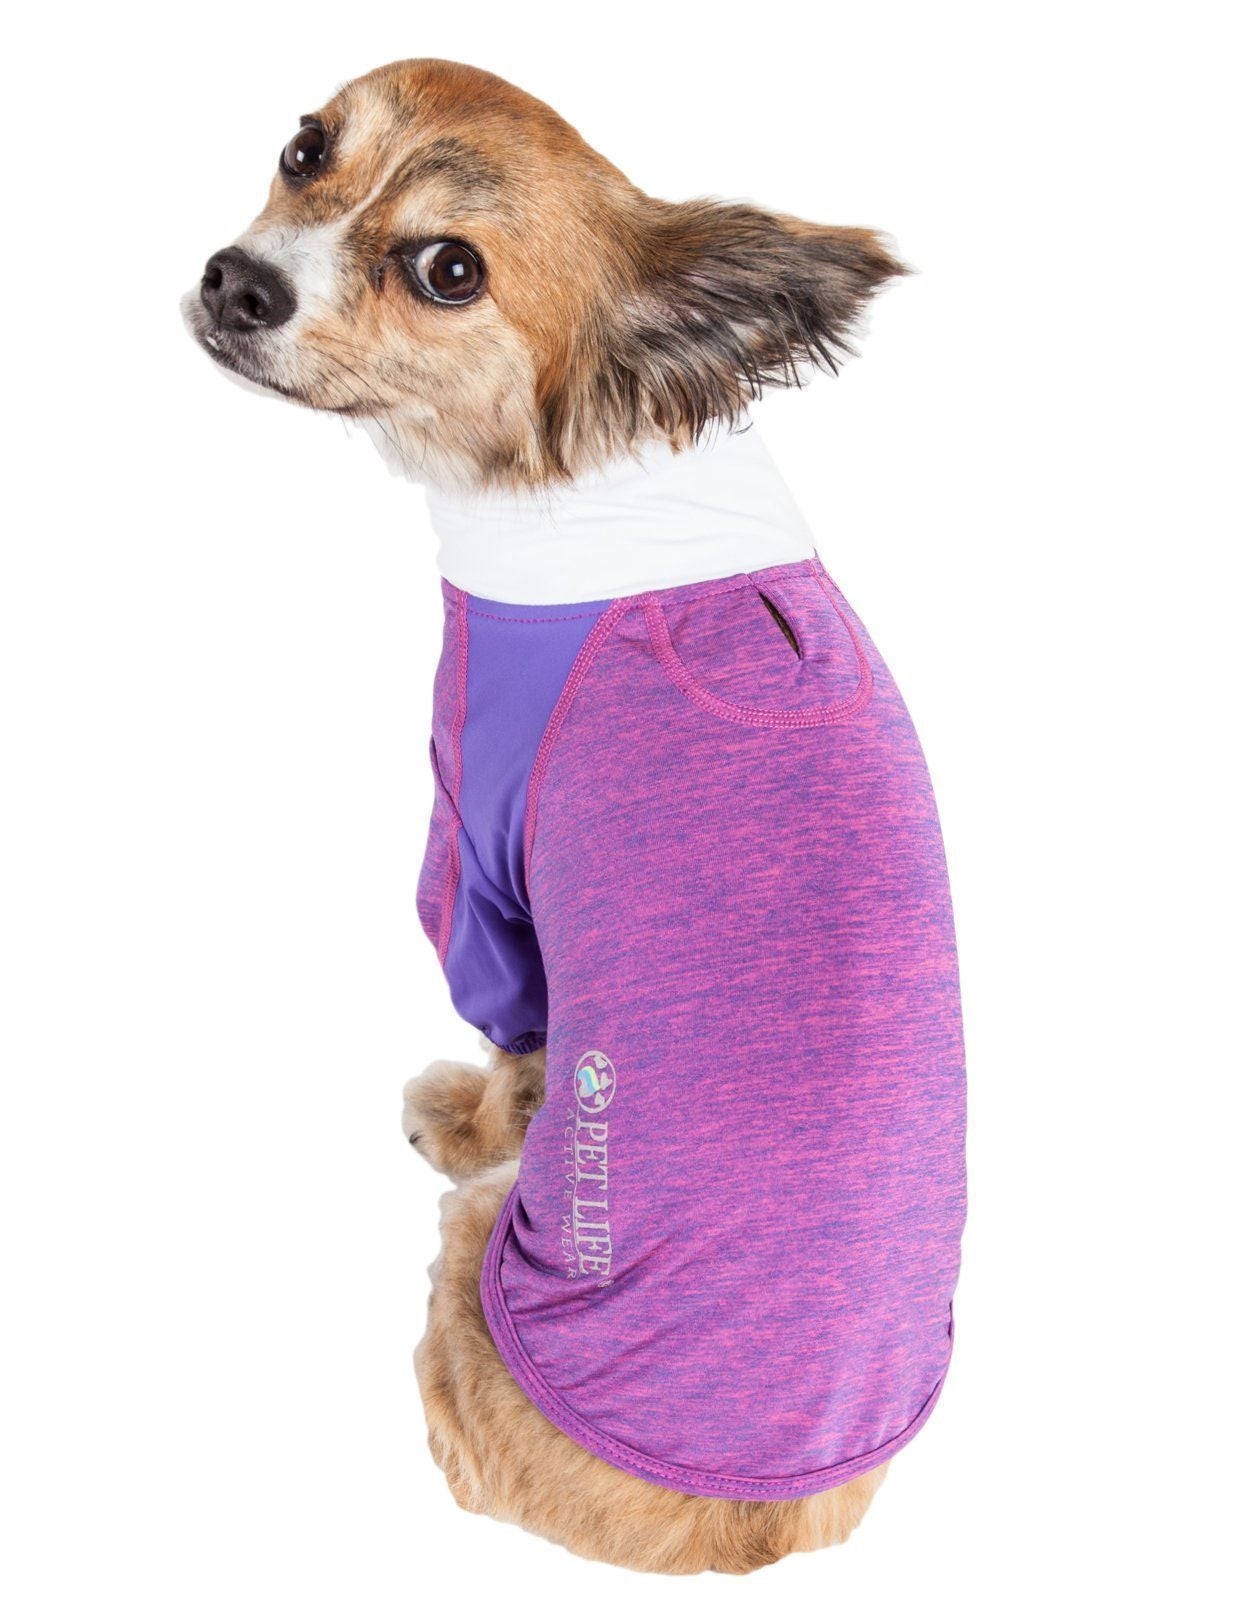 Pet Life ® Active 'Chewitt Wagassy' 4-Way-Stretch Yoga Fitness Long-Sleeve Dog T-Shirt X-Small Lavander